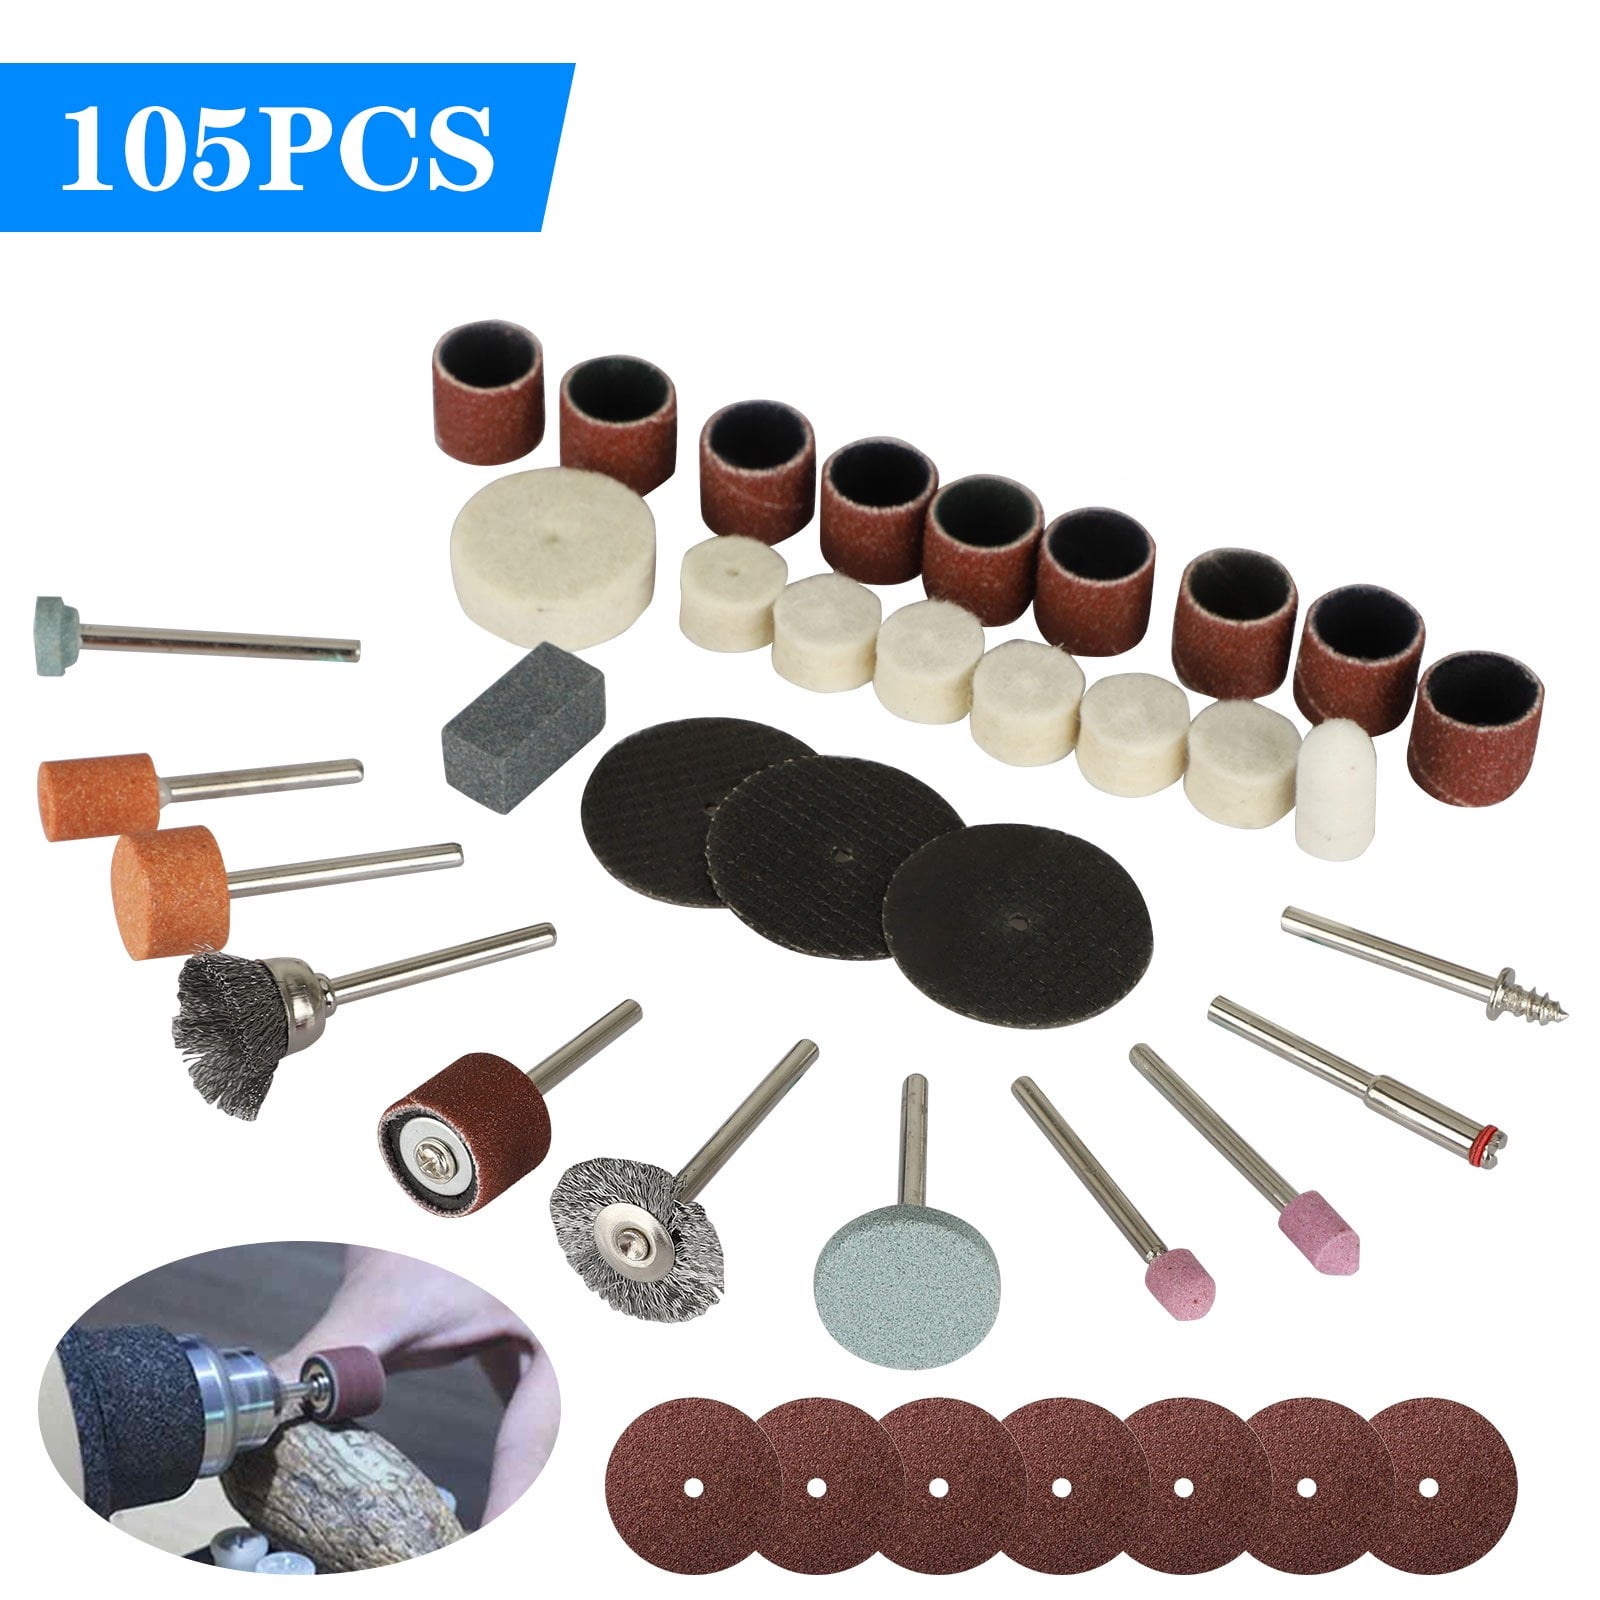 350pcs Rotary Tool Accessories Kit, EEEkit Sanding Cutting Grinder Set Fit  for Dremel Rotary Tool, Engraver Polisher Sander for Grinding, Sharpening,  Polishing, Engraving, Drilling, Cleaning 